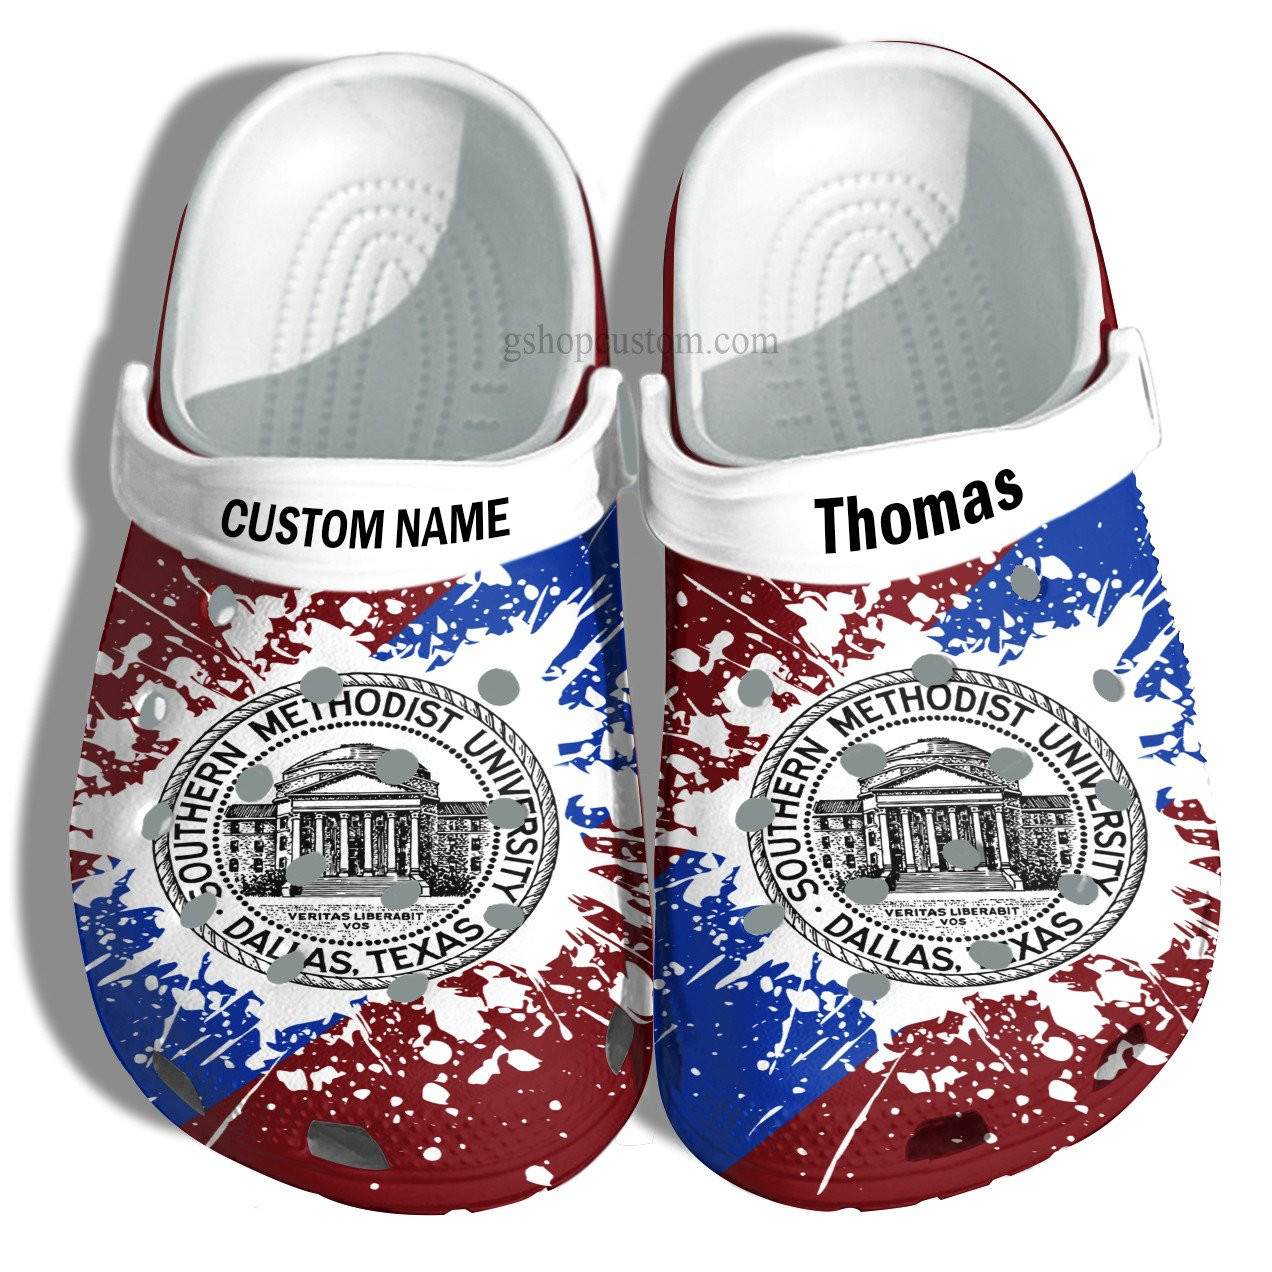 Southern Methodist University Graduation Gifts Croc Shoes Customize- Admission Gift Crocs Shoes